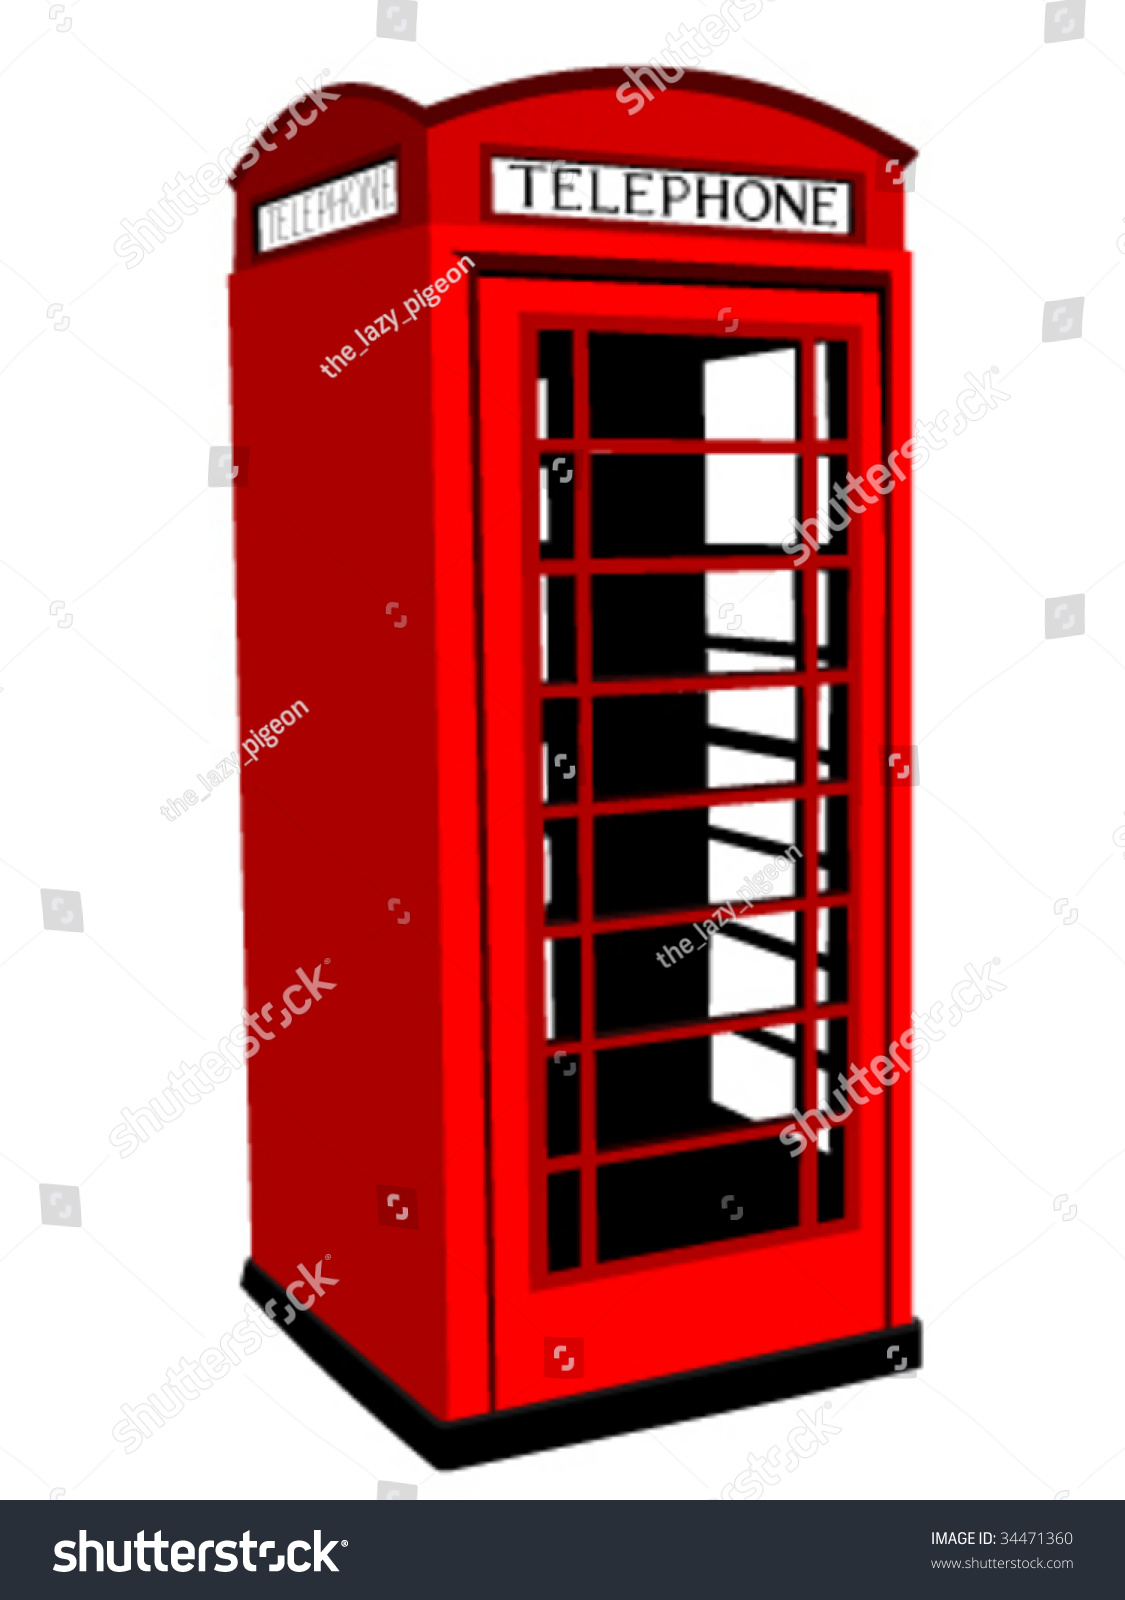 phone booth clipart - photo #40